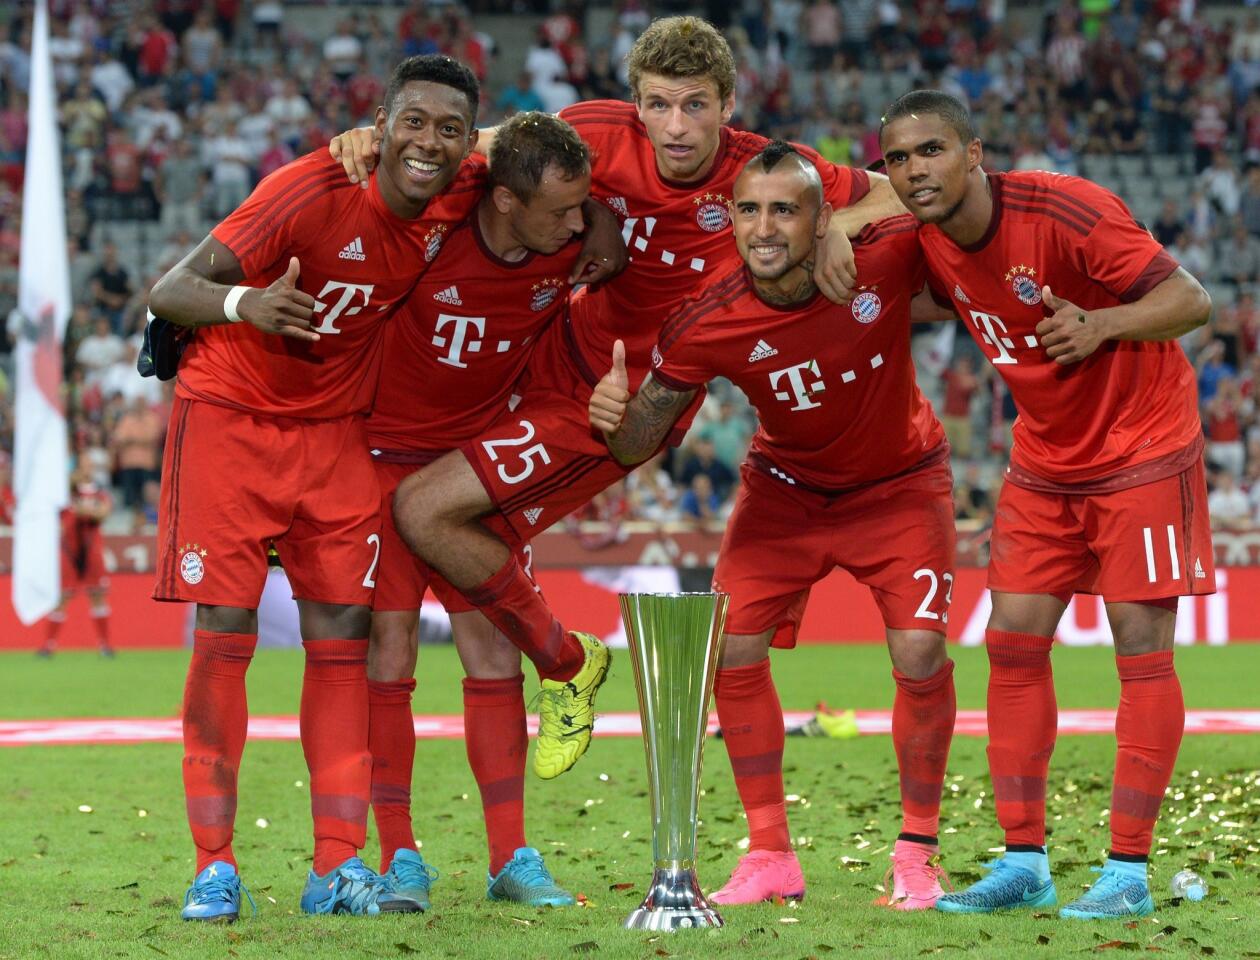 (L-R) Bayern Munich's Austrian defender David Alaba, Bayern Munich's Brazilian defender Rafinha, Bayern Munich's striker Thomas Mueller, Bayern Munich's Chilean midfielder Arturo Vidal and Bayern Munich's Brazilian midfielder Douglas Costa joke with the trophy after the Audi Cup final football match Real Madrid vs FC Bayern Munich in Munich, southern Germany, on August 5, 2015. Bayern Munich won the match 1-0. AFP PHOTO / CHRISTOF STACHECHRISTOF STACHE/AFP/Getty Images ** OUTS - ELSENT, FPG - OUTS * NM, PH, VA if sourced by CT, LA or MoD **